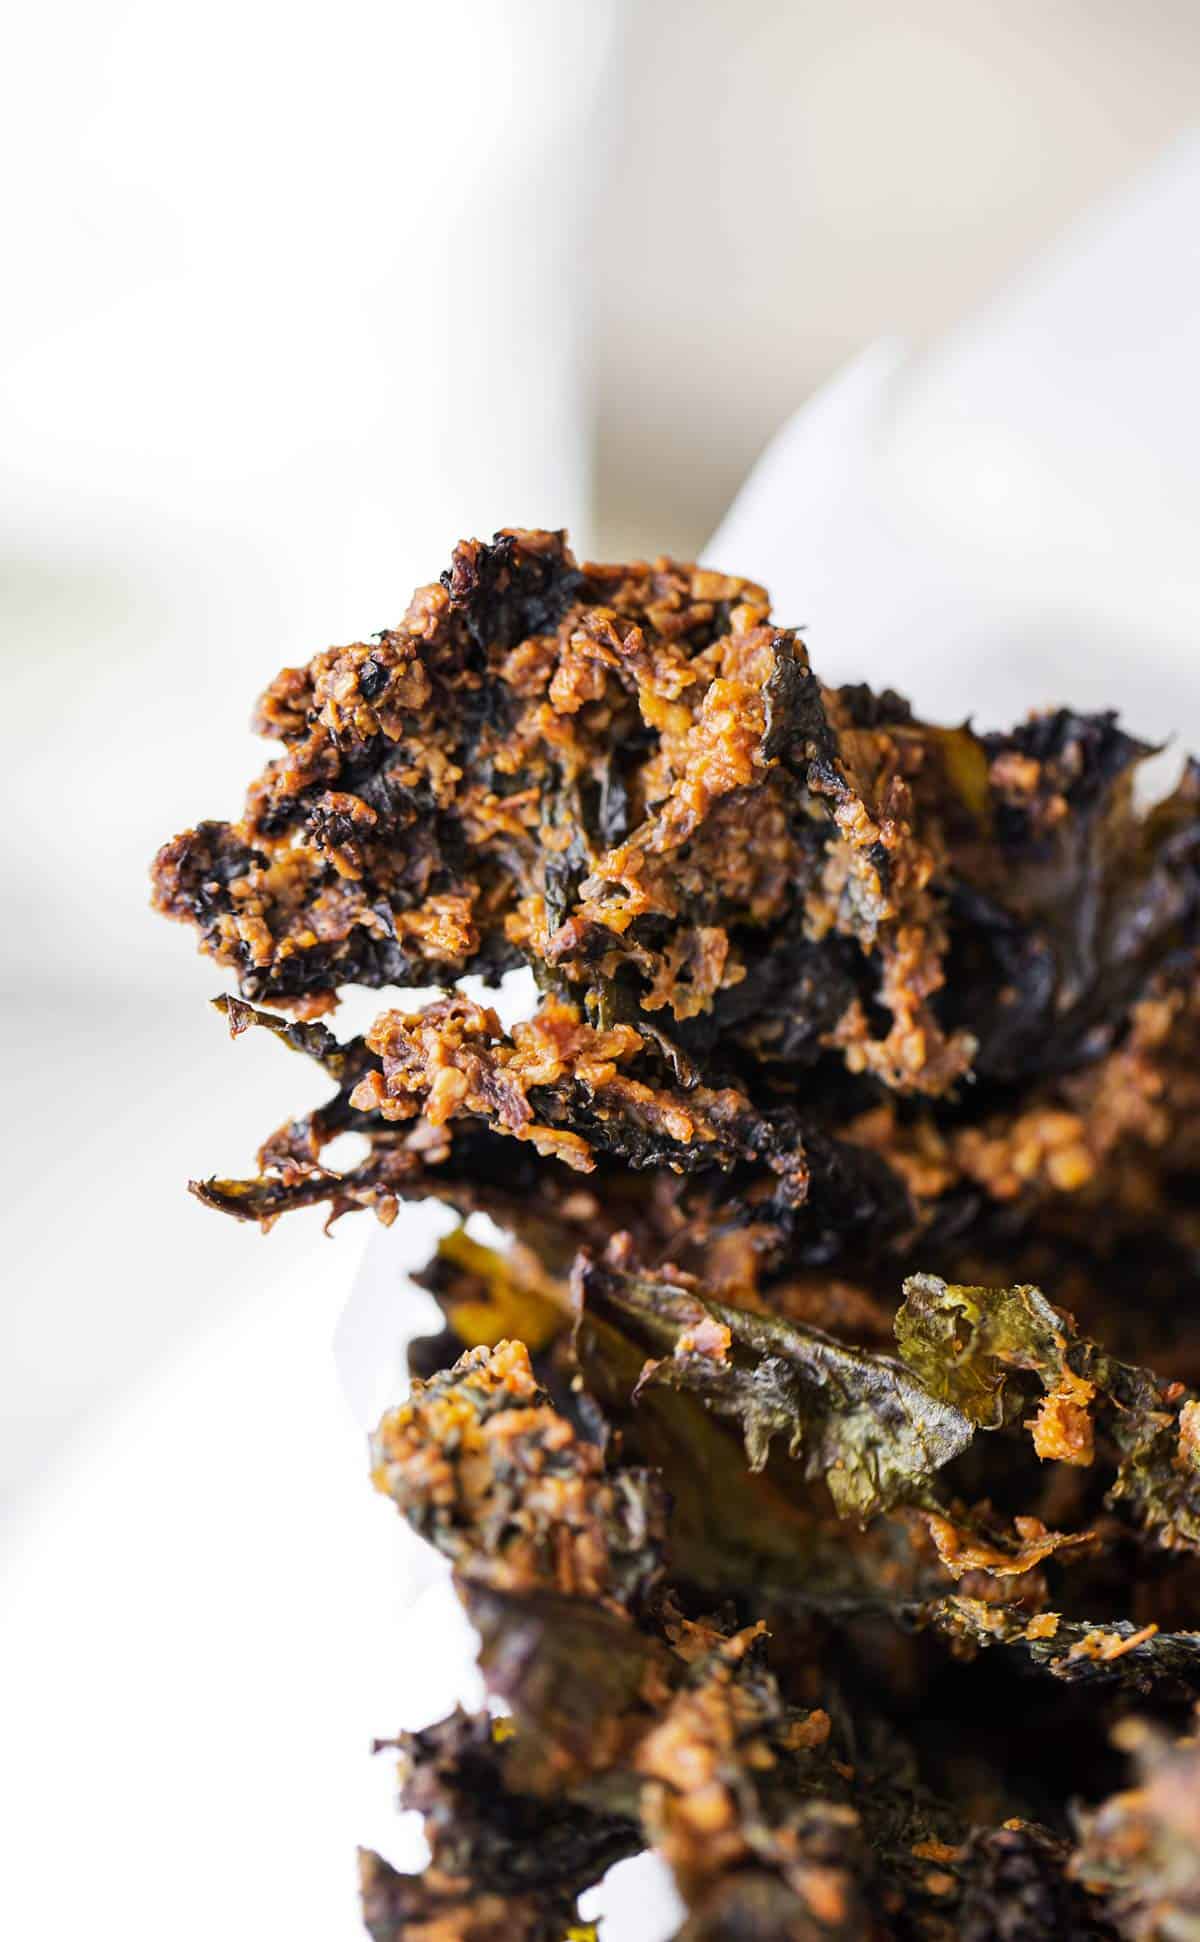 Not-cho 'Cheese' Crispy Kale Chips are oven baked with a zesty nacho-inspired seasoning made from cashews, nutritional yeast, salsa and more. kale chips | kale chips recipe | crispy kale | how to make kale chips | baked kale chips | spicy kale chips | kale chips nutritional yeast